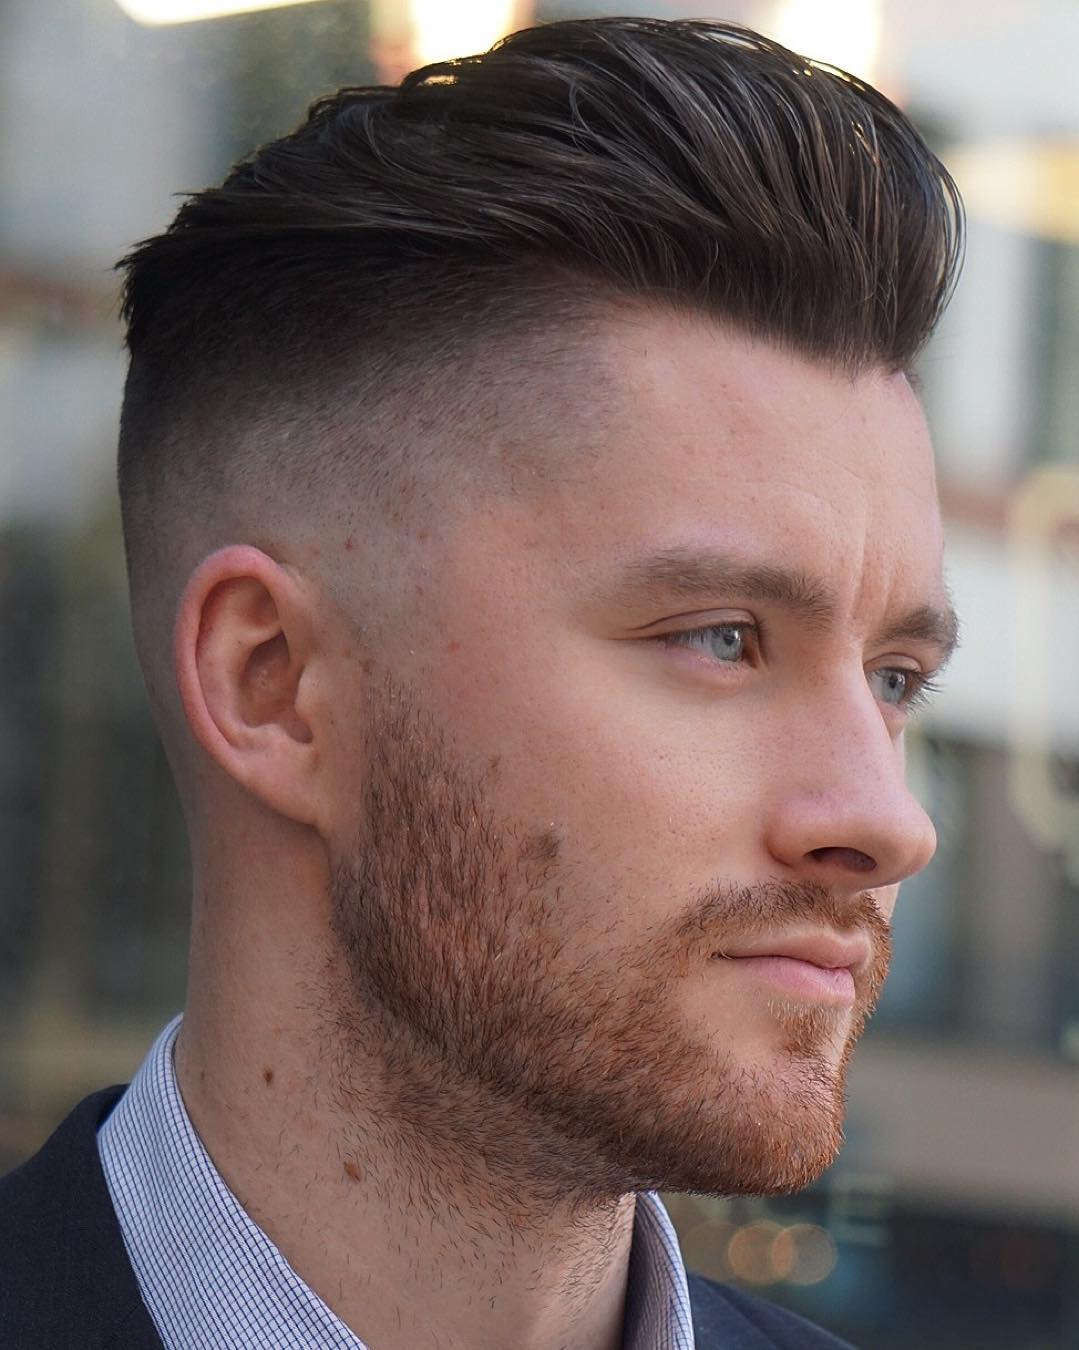 Hairstyles For Men Undercut
 50 Stylish Undercut Hairstyle Variations to copy in 2019